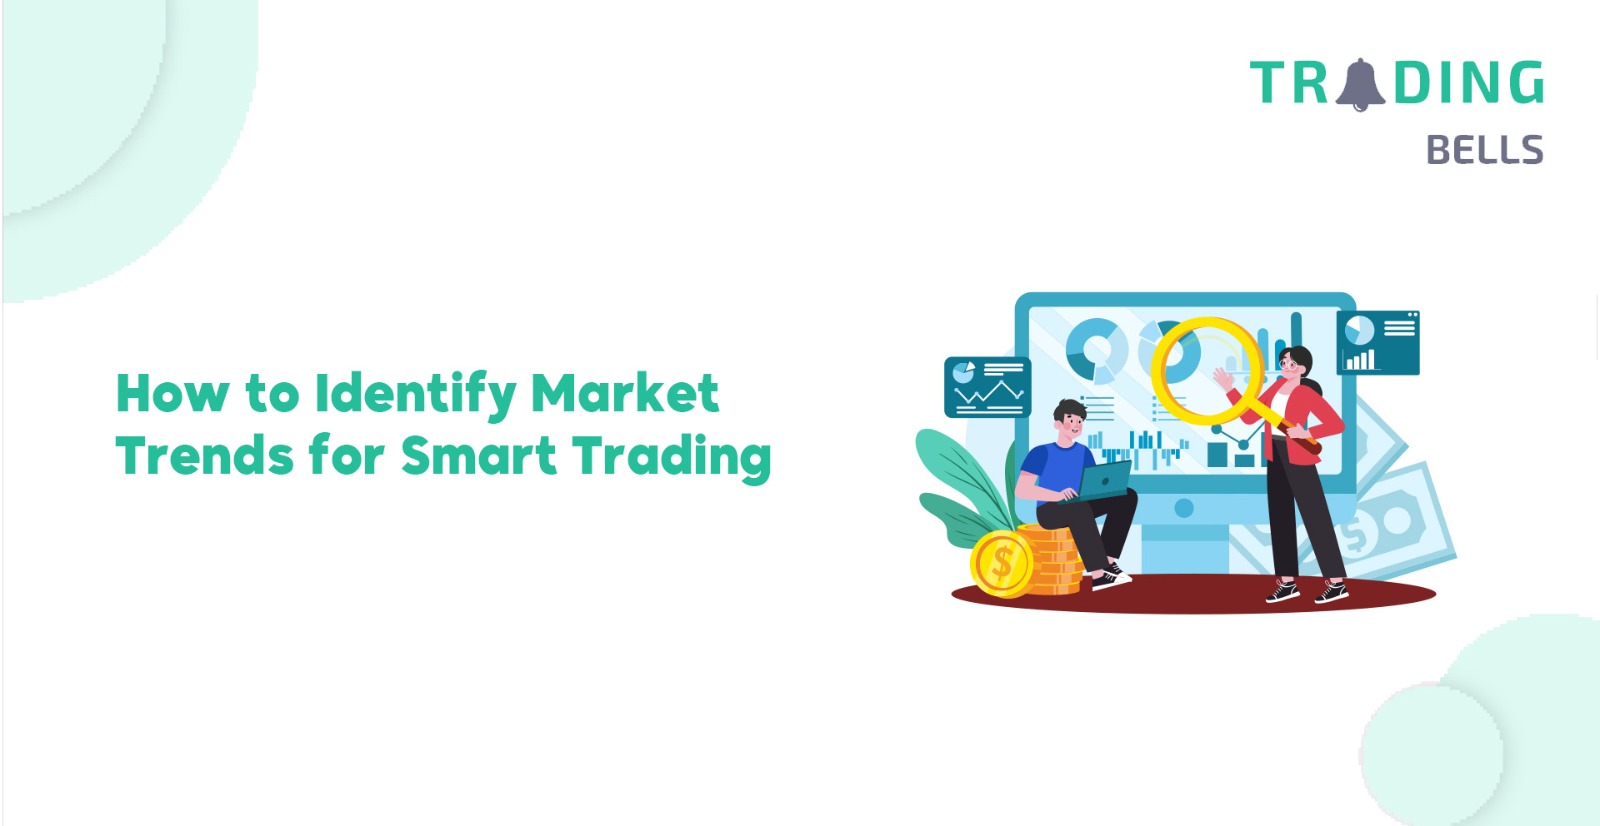 How to Identify Market Trends for Smart Trading